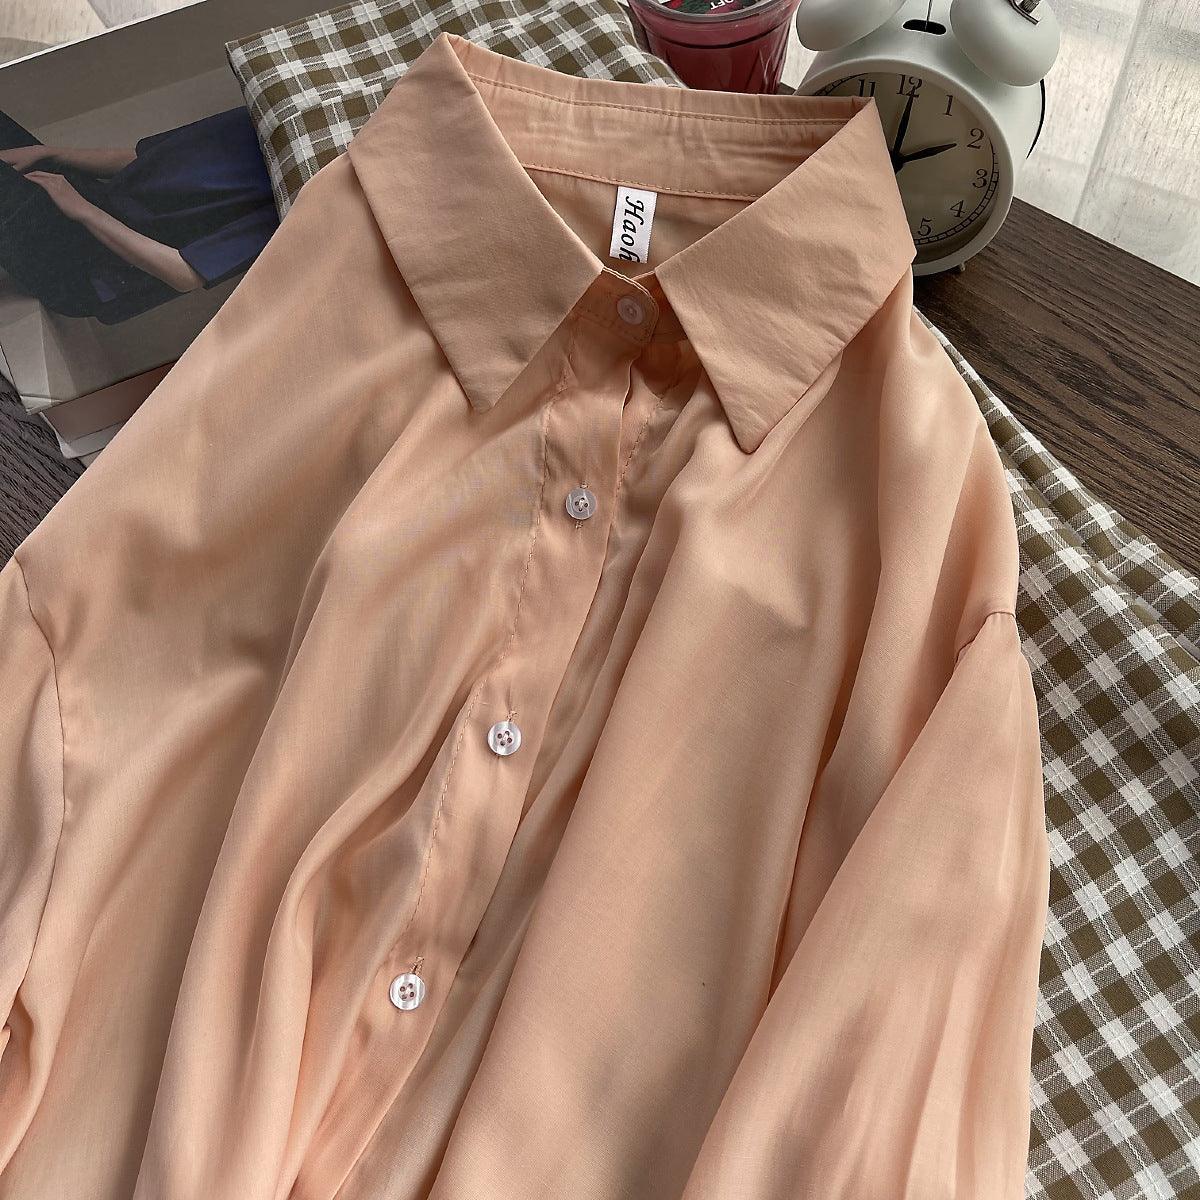 Women's Solid Color Button Down Shirt with Long Sleeves - Light orange One size